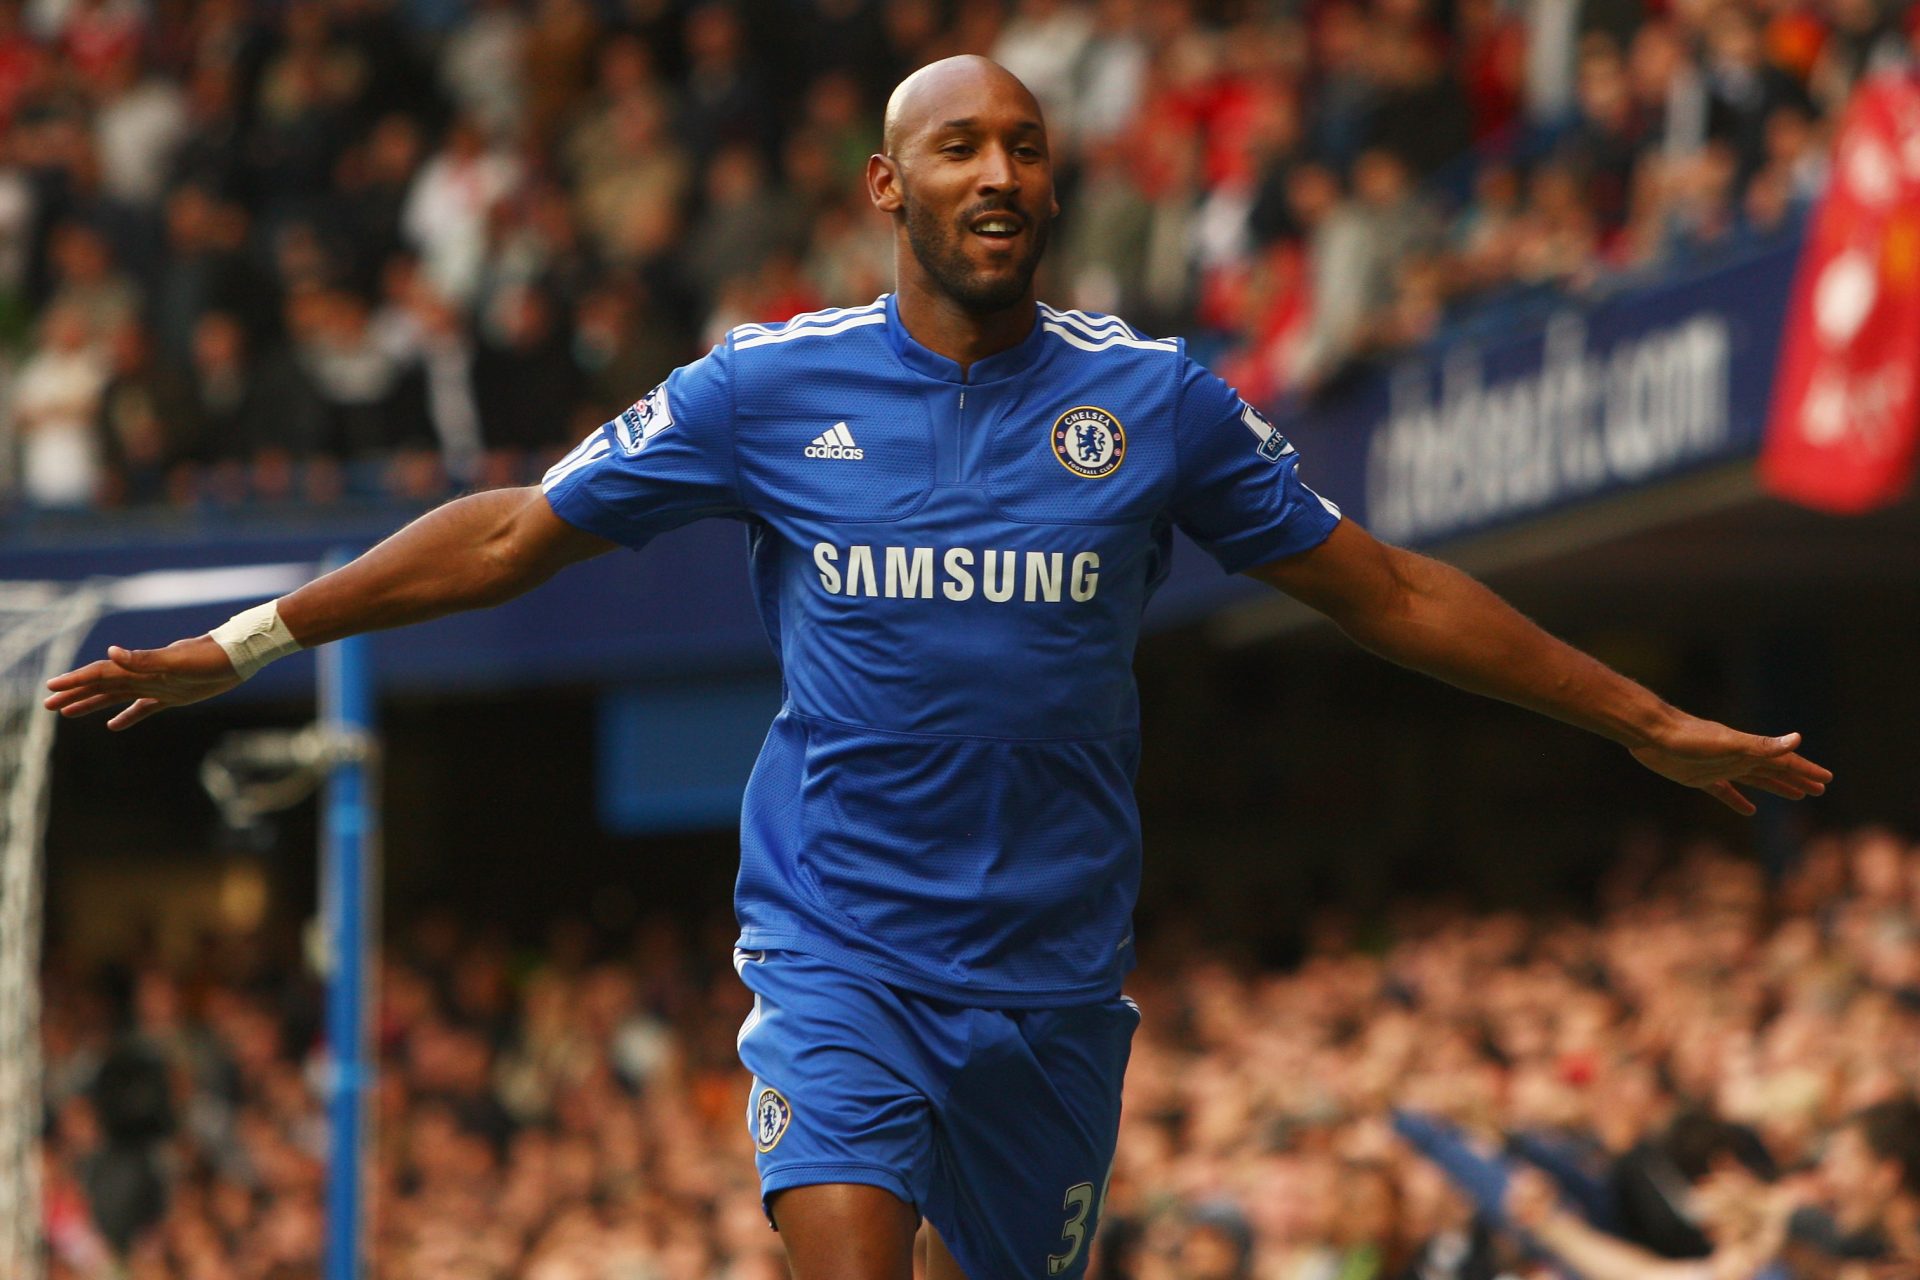 A look back at Anelka's career